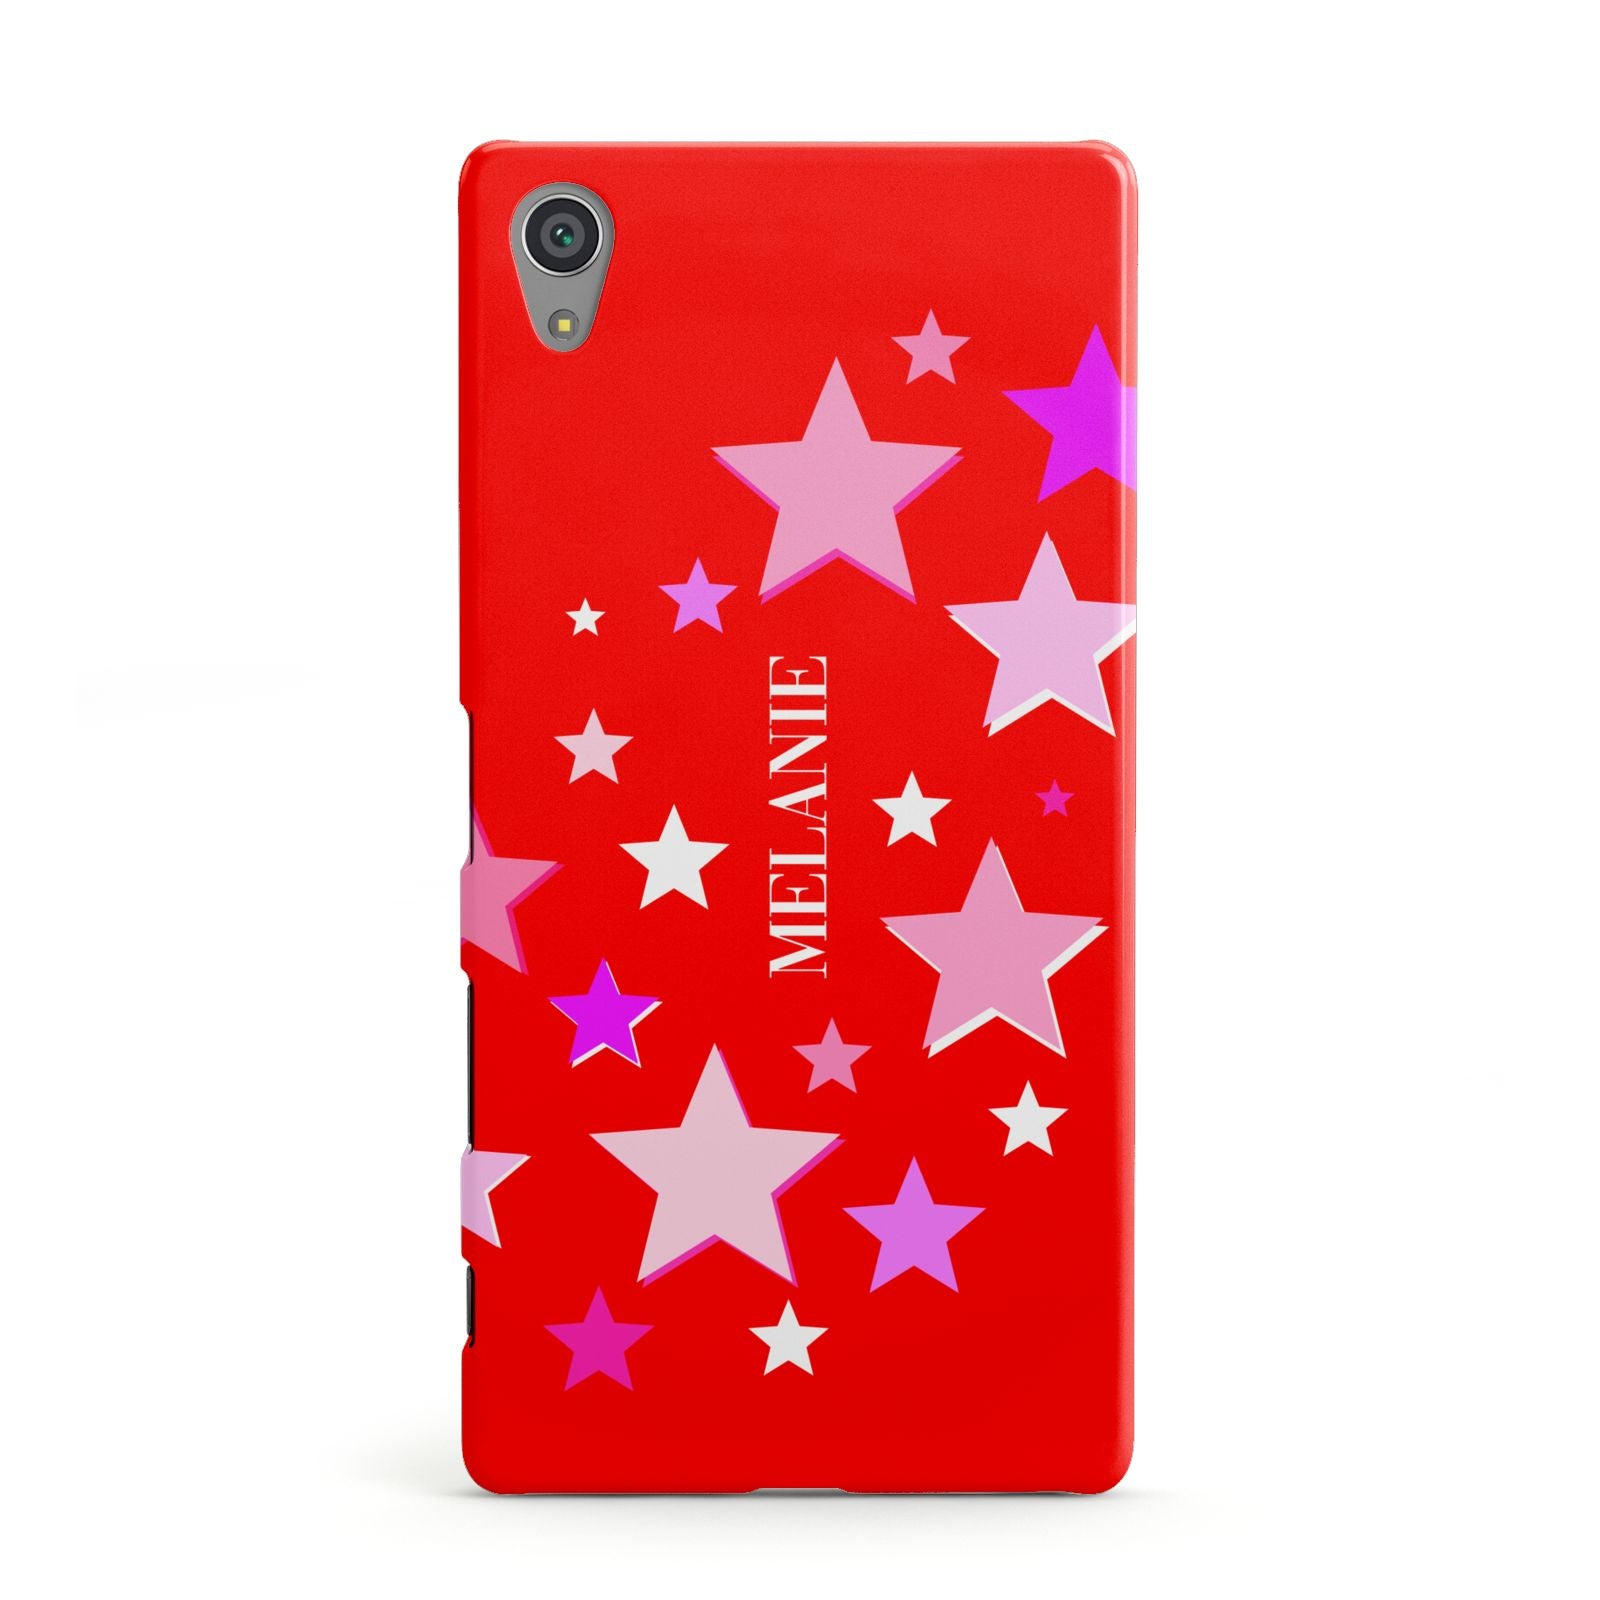 Personalised Stars Sony Xperia Case